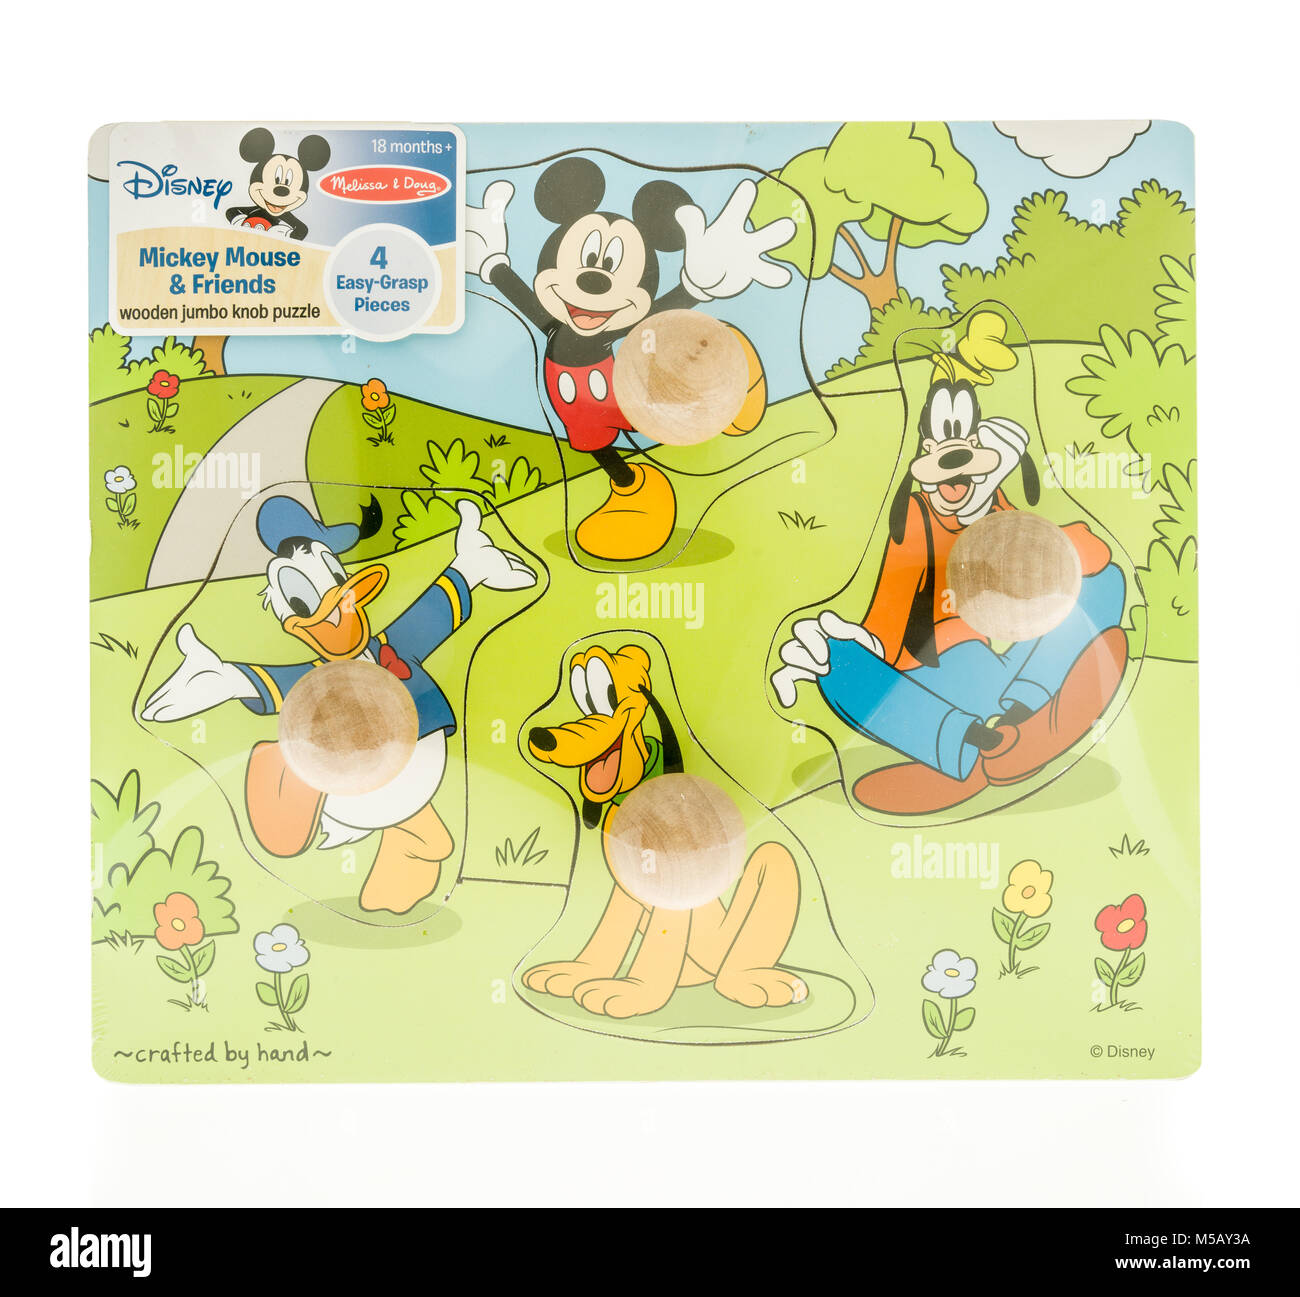 Winneconne, WI - 19 November 2017: A package of Disney puzzle featuring Mickey Mouse, Donald Duck, Goofy and Pluto on an isolated background. Stock Photo